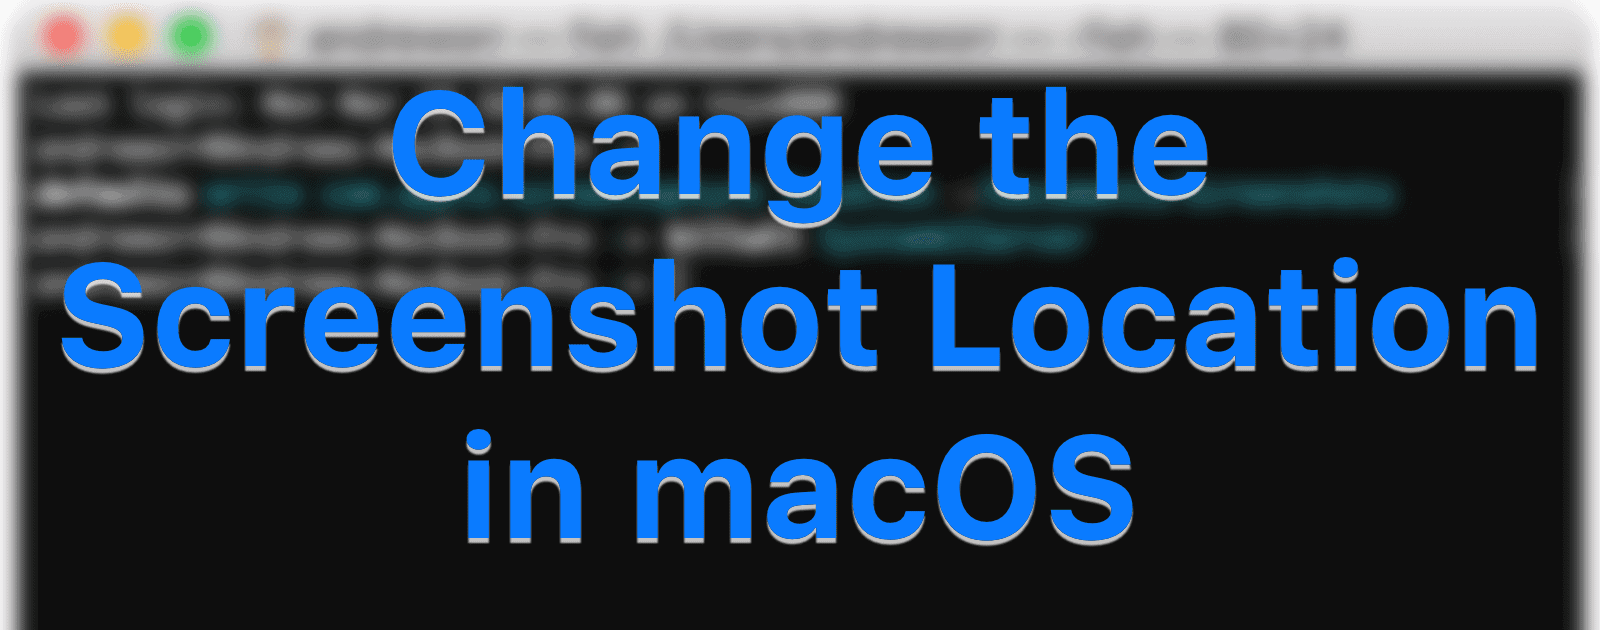 macOS High Sierra: How to Change Screenshot Location With Terminal